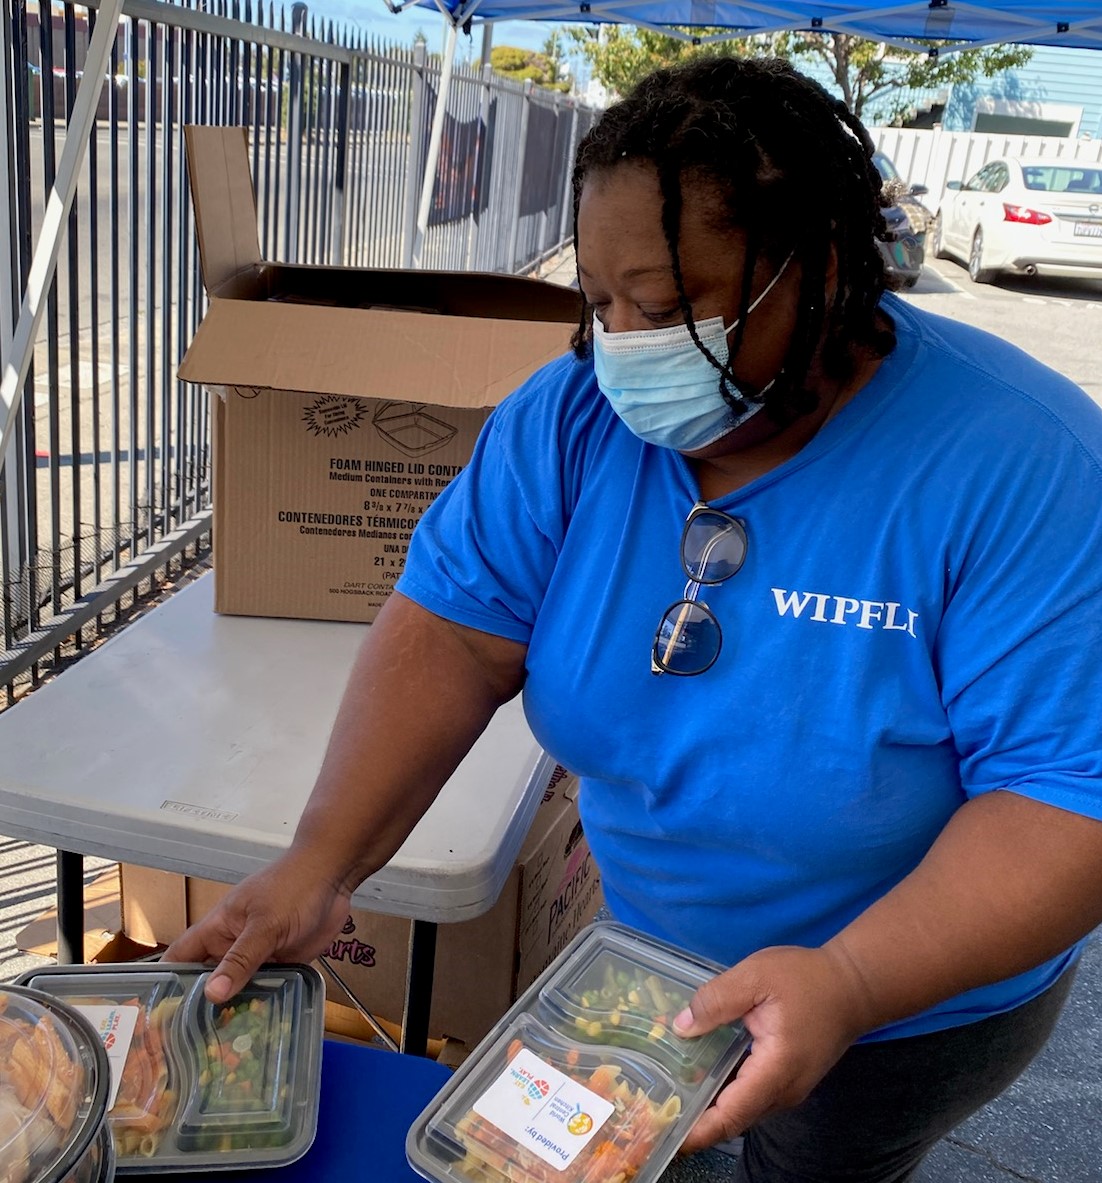 Temeshia is always seeking ways to serve her community, even in a pandemic